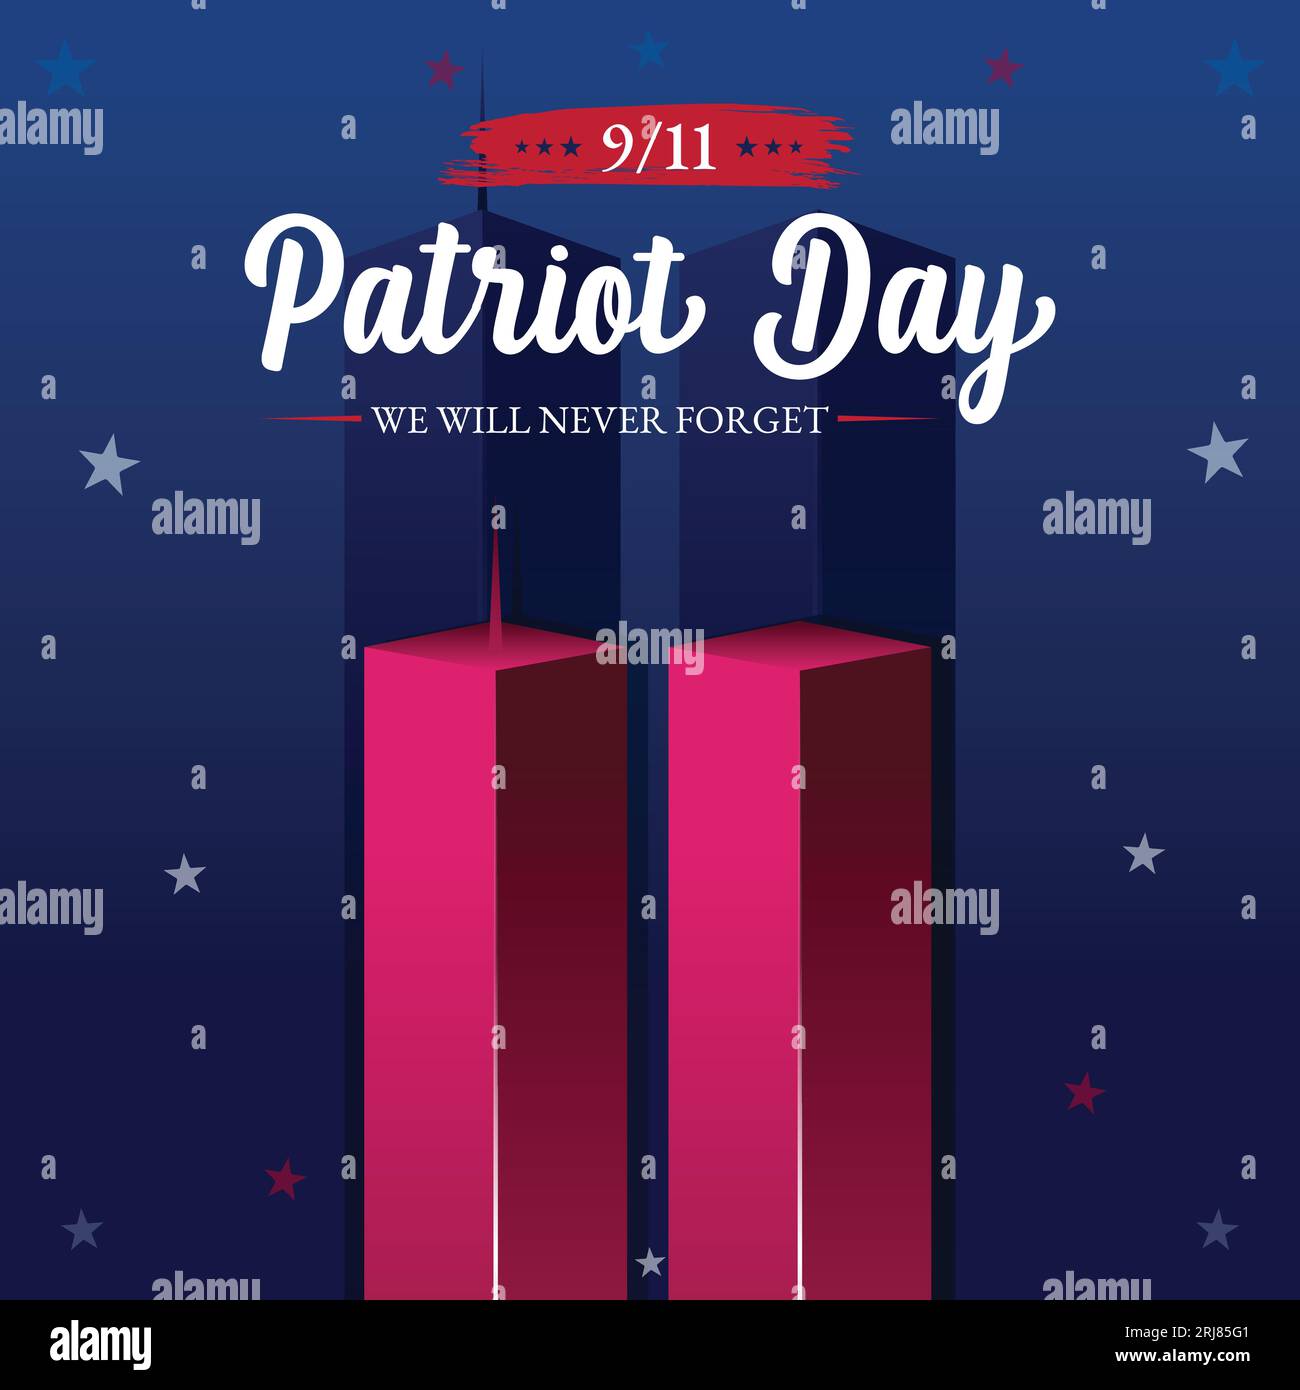 Remembering September 9 11. Patriot Day September 11. Never Forget USA 9 11. World Trade Center Nine Eleven Template With Red, White, And Blue Color Stock Vector